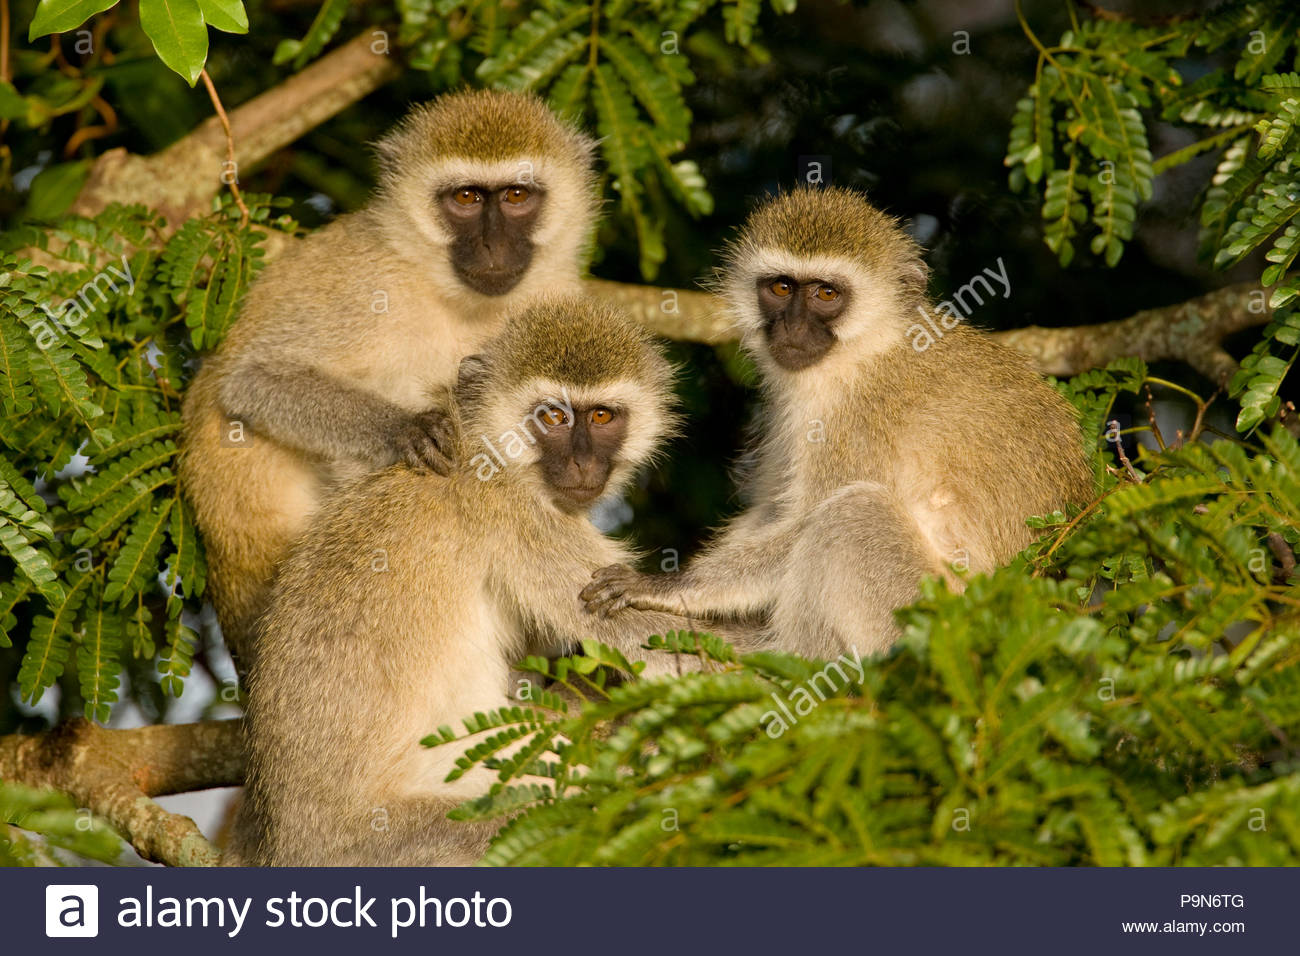 Three vervet monkeys, Cercopithecus Aethiops, perched in a tree. Stock Photo